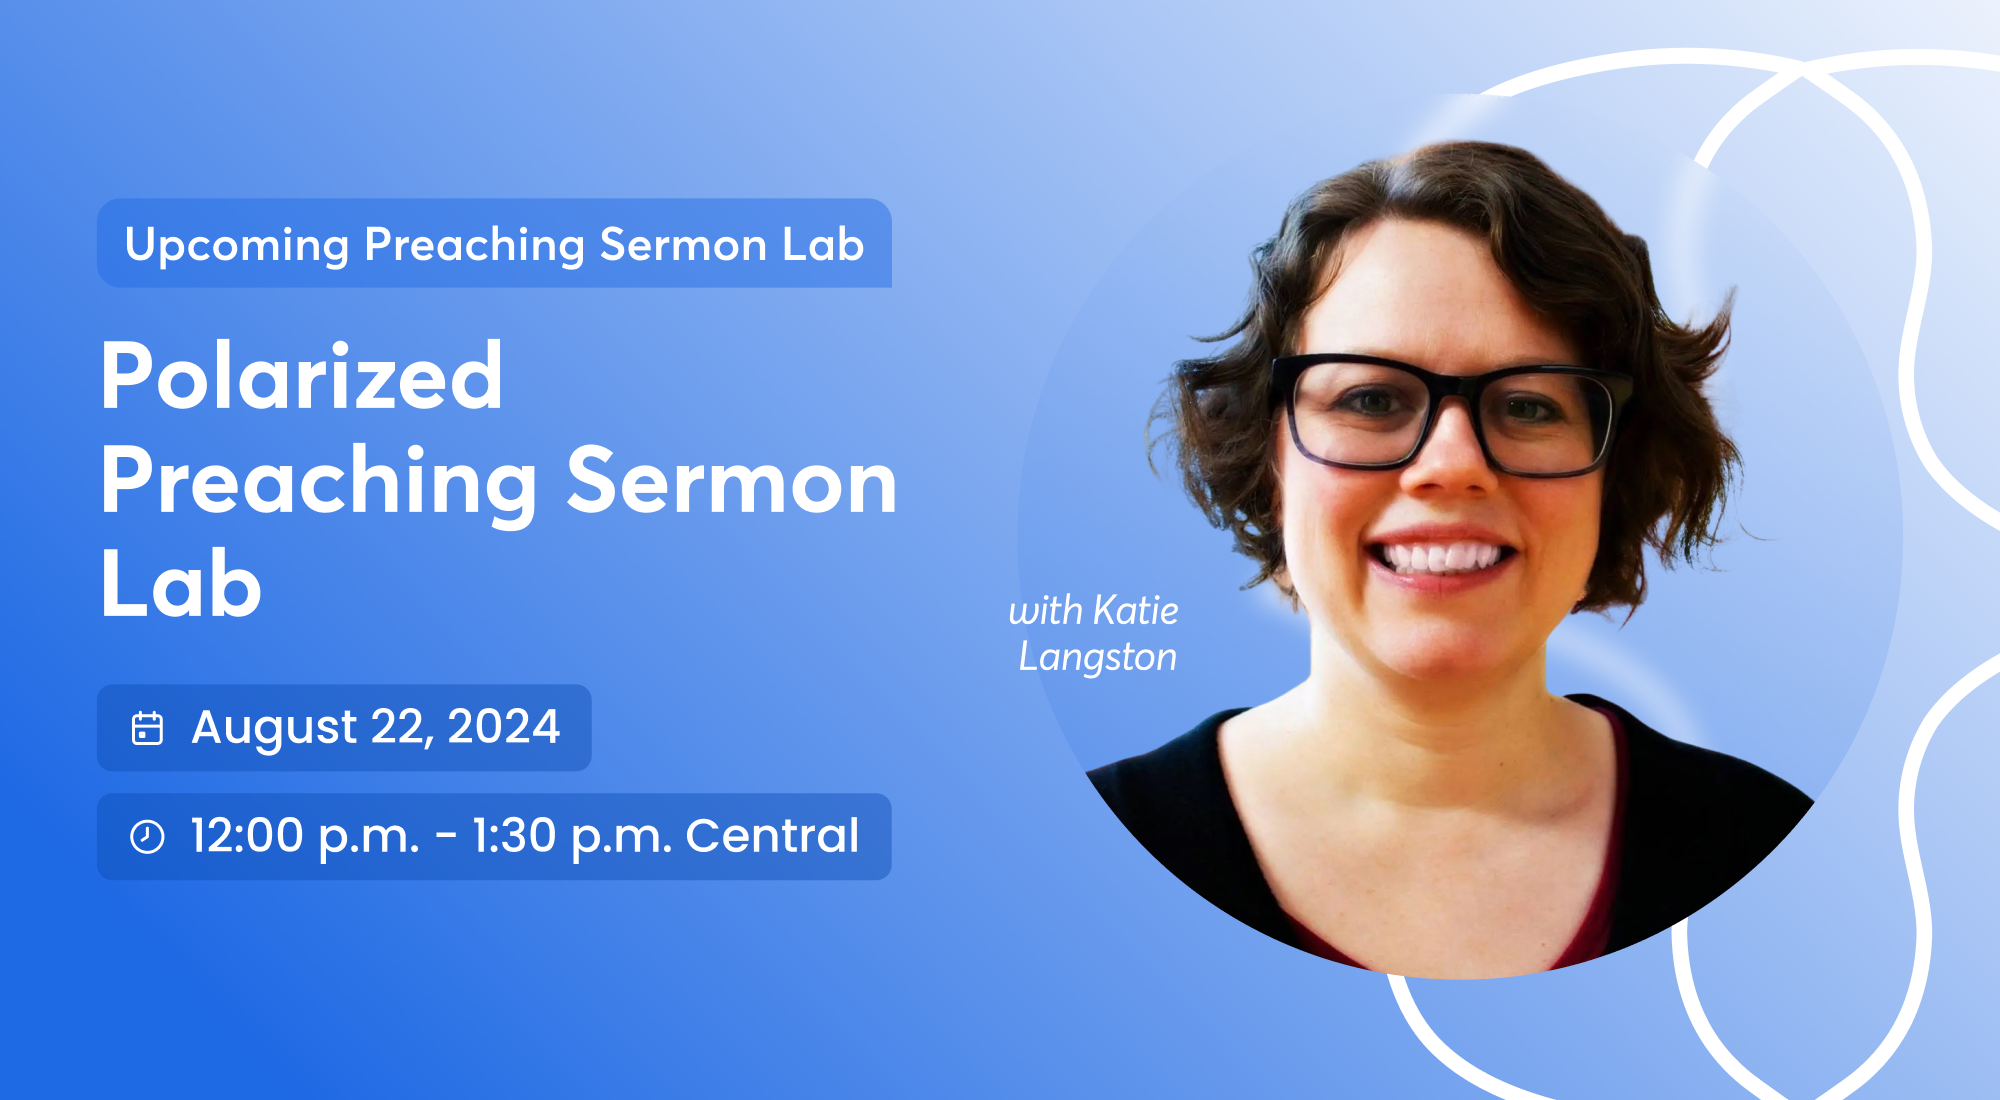 Faith+Lead Preaching in an Age of Polarization Banner for upcoming live learning workshop on August 22nd, 2024 from 12:00 - 1:30 pm central with Katie Langston